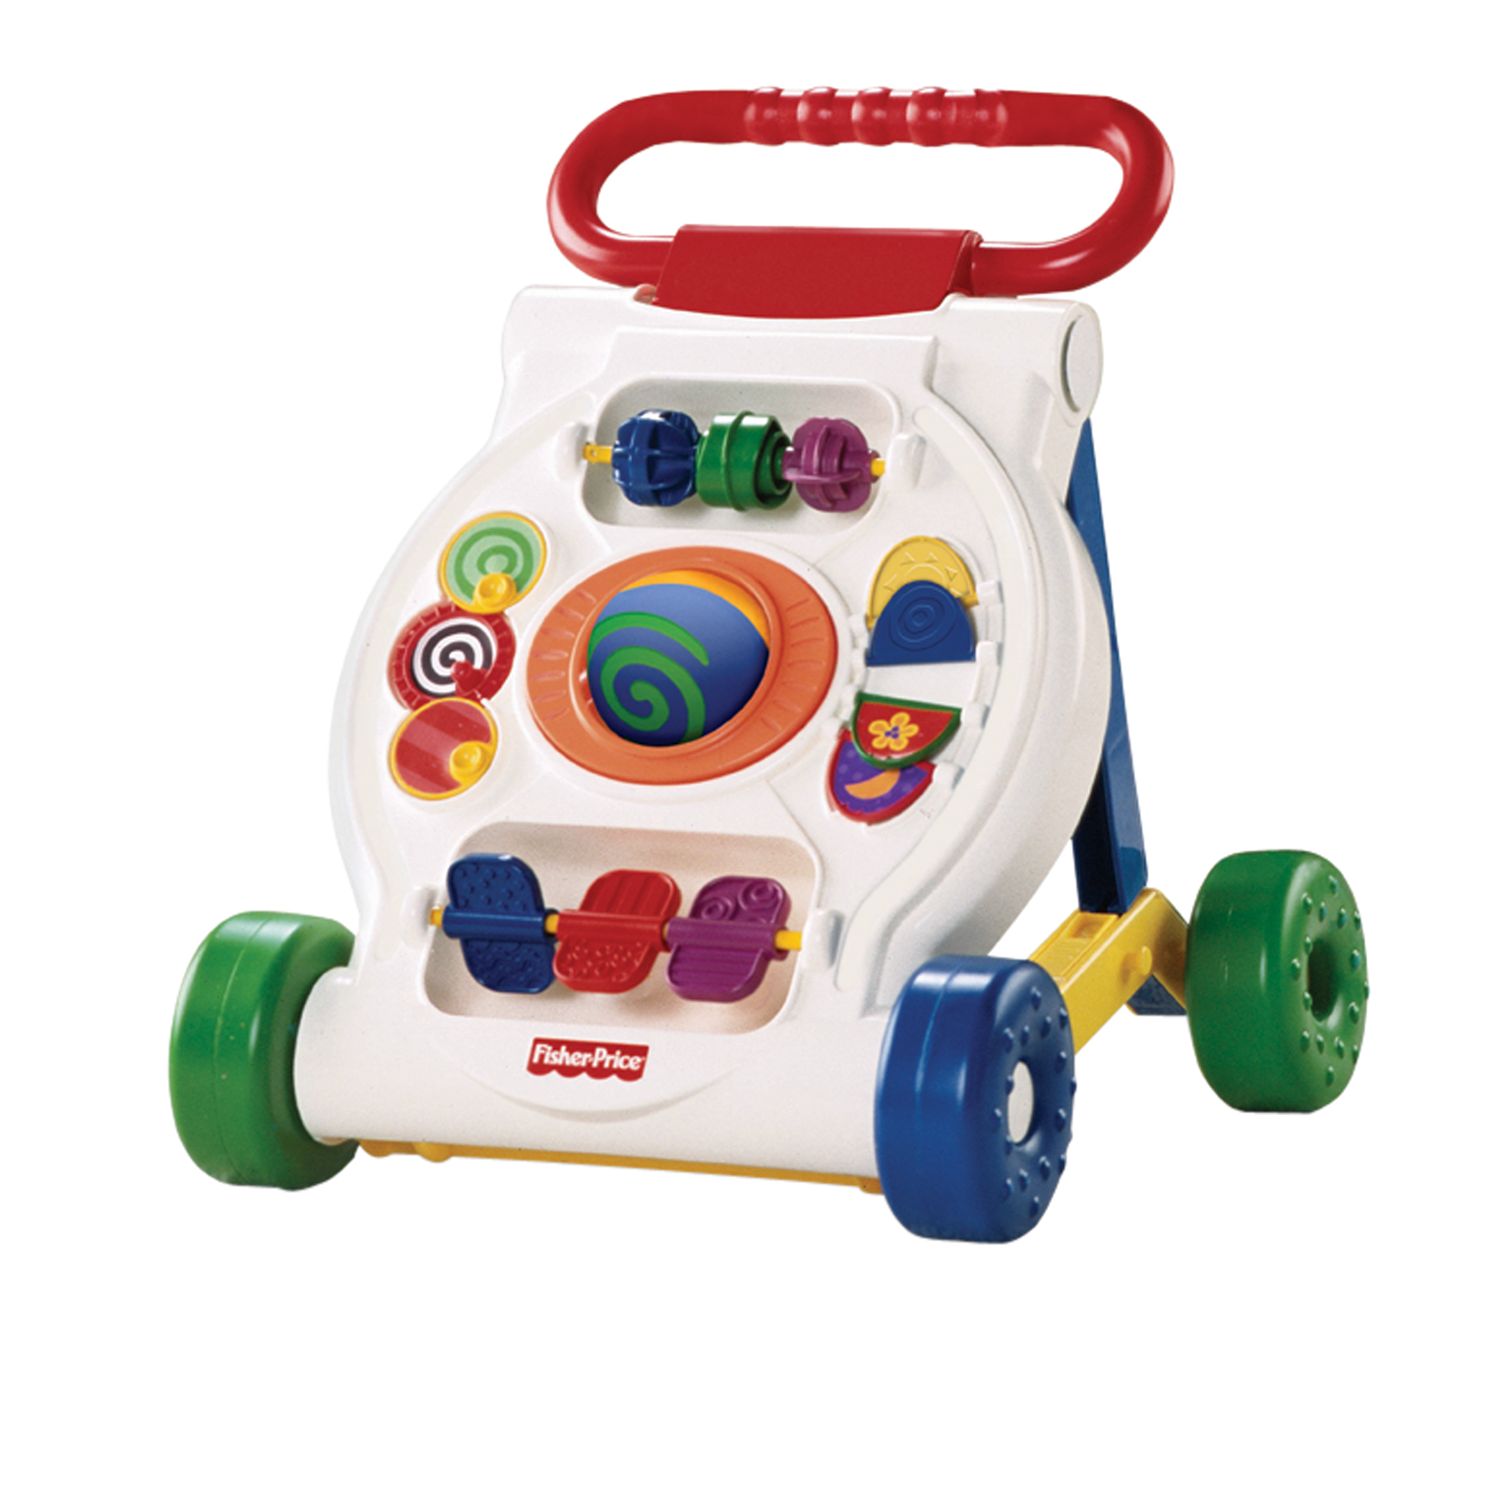 baby walker toy fisher price